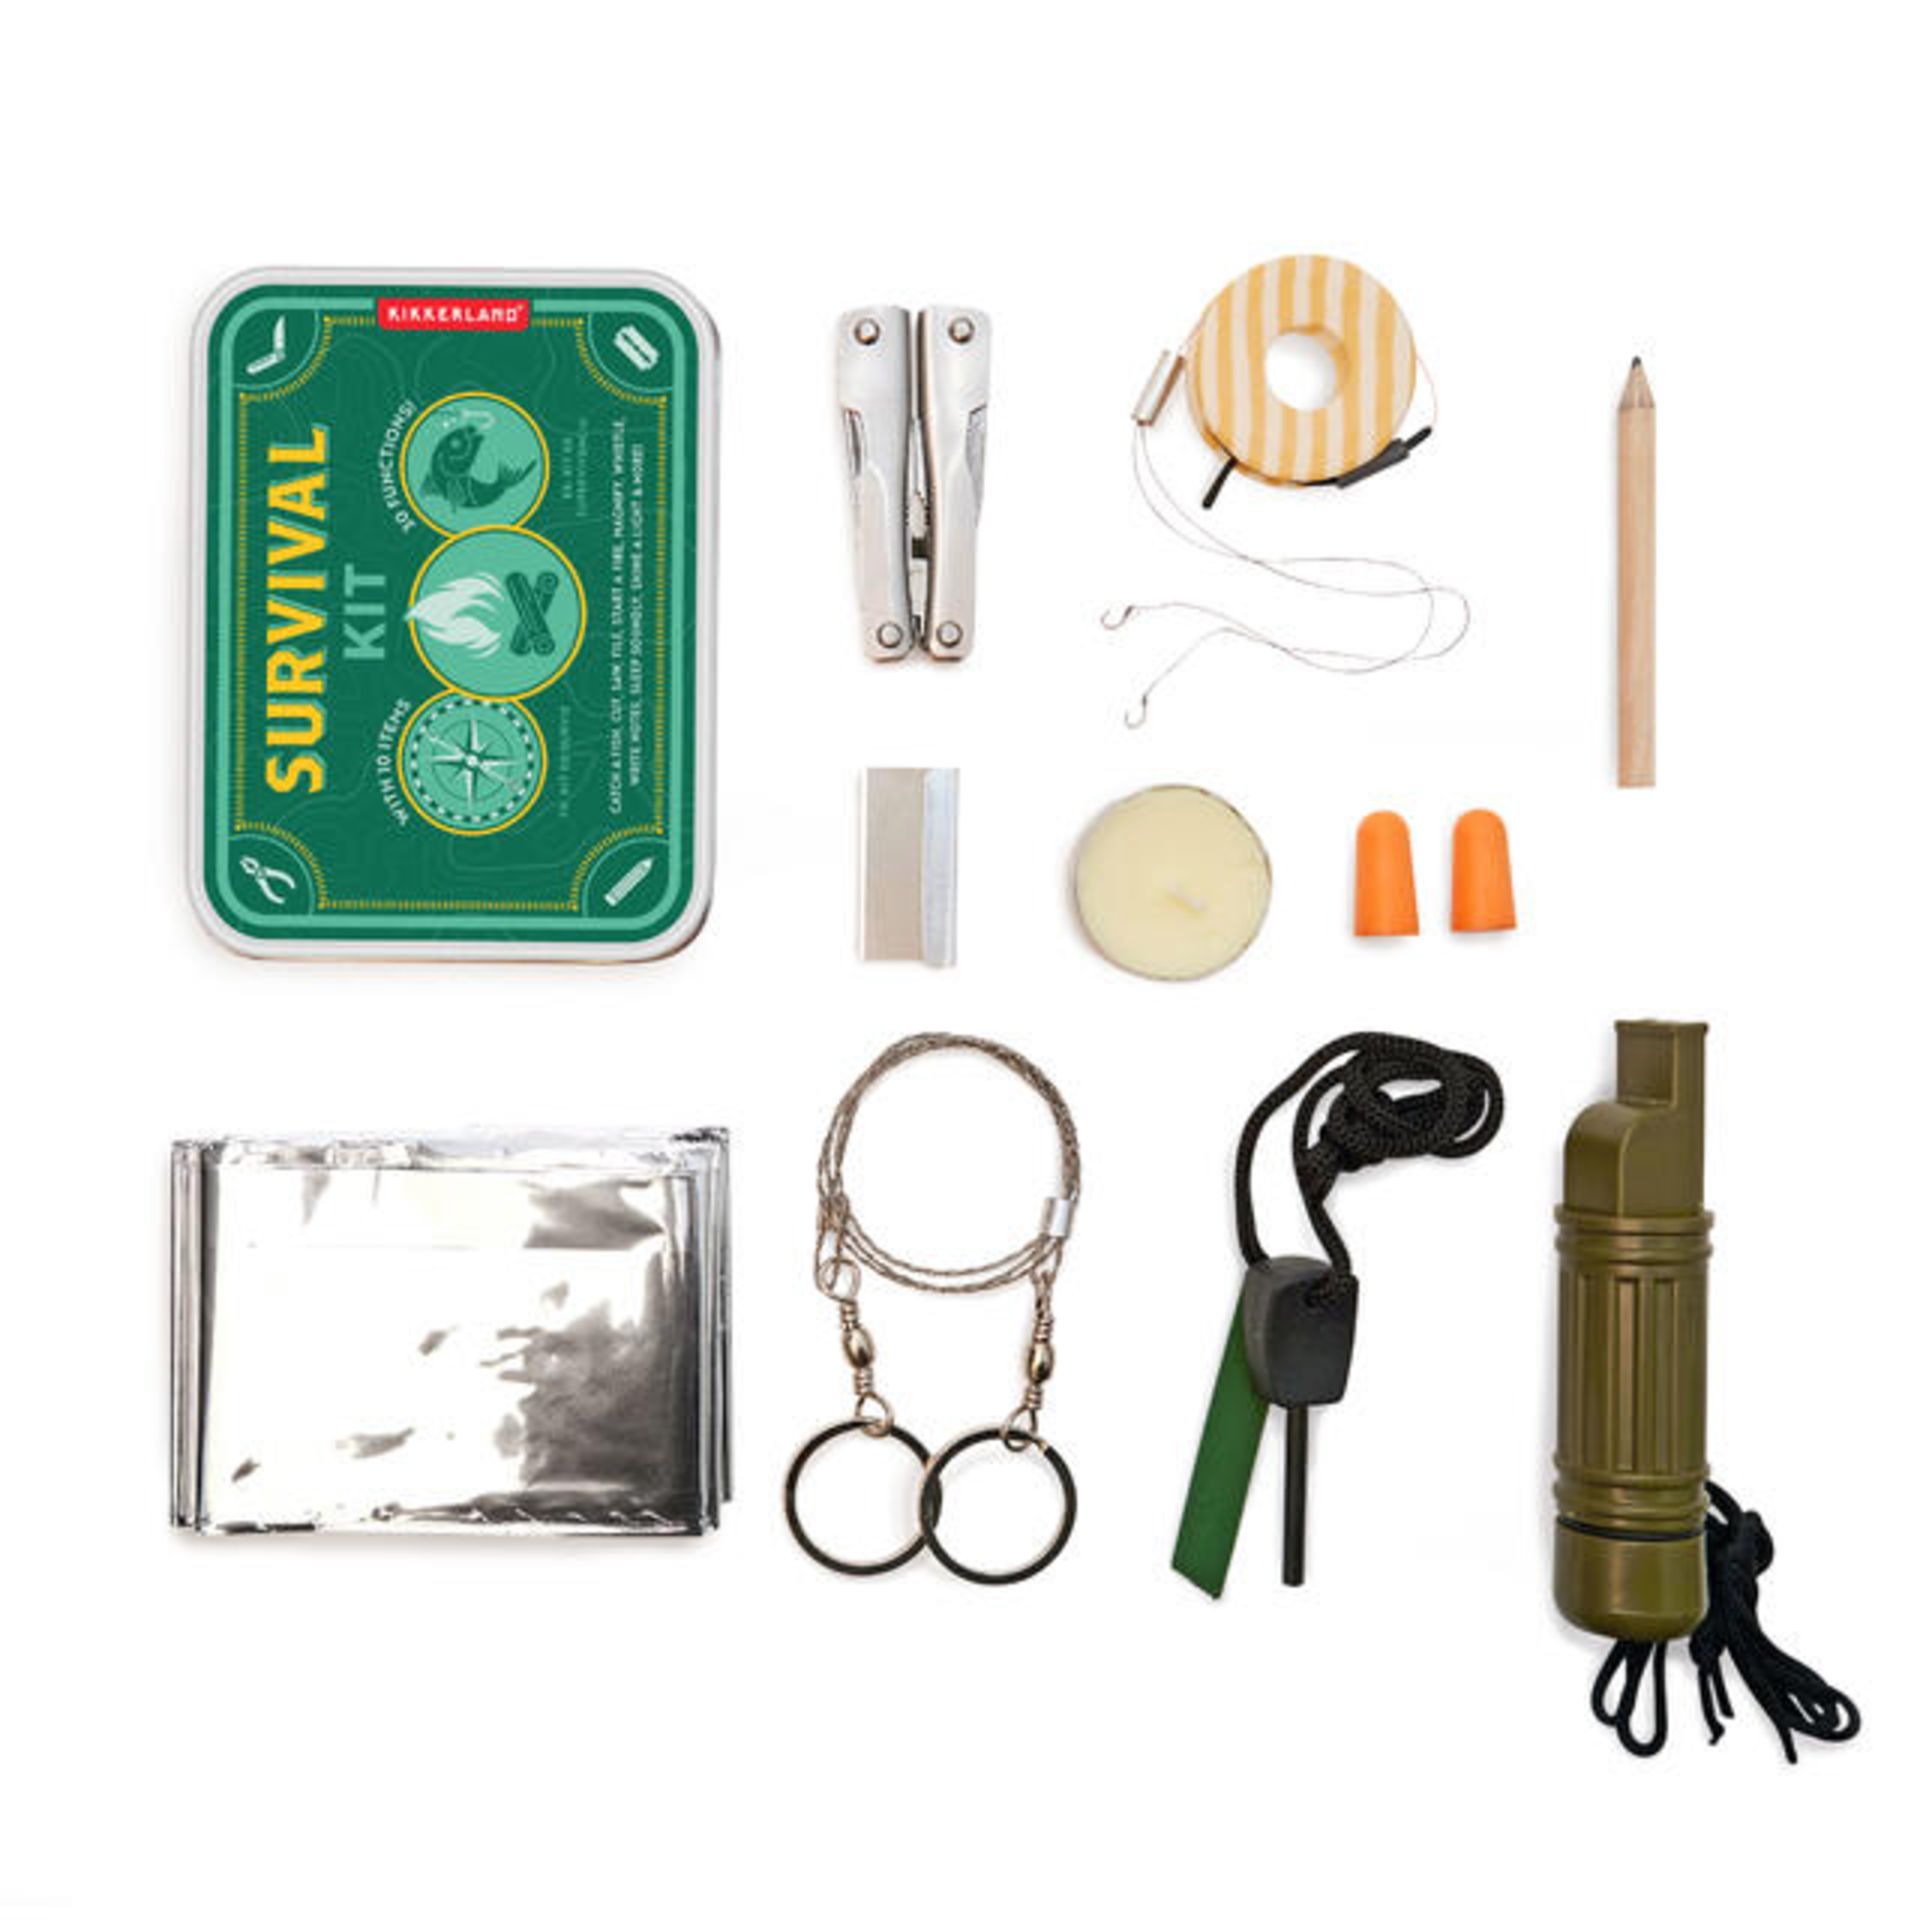 2 x Kikkerland Survival Kits - Each Kit 10 Items With 30 Survival Functions - New Stock - RRP £70 - Image 3 of 5